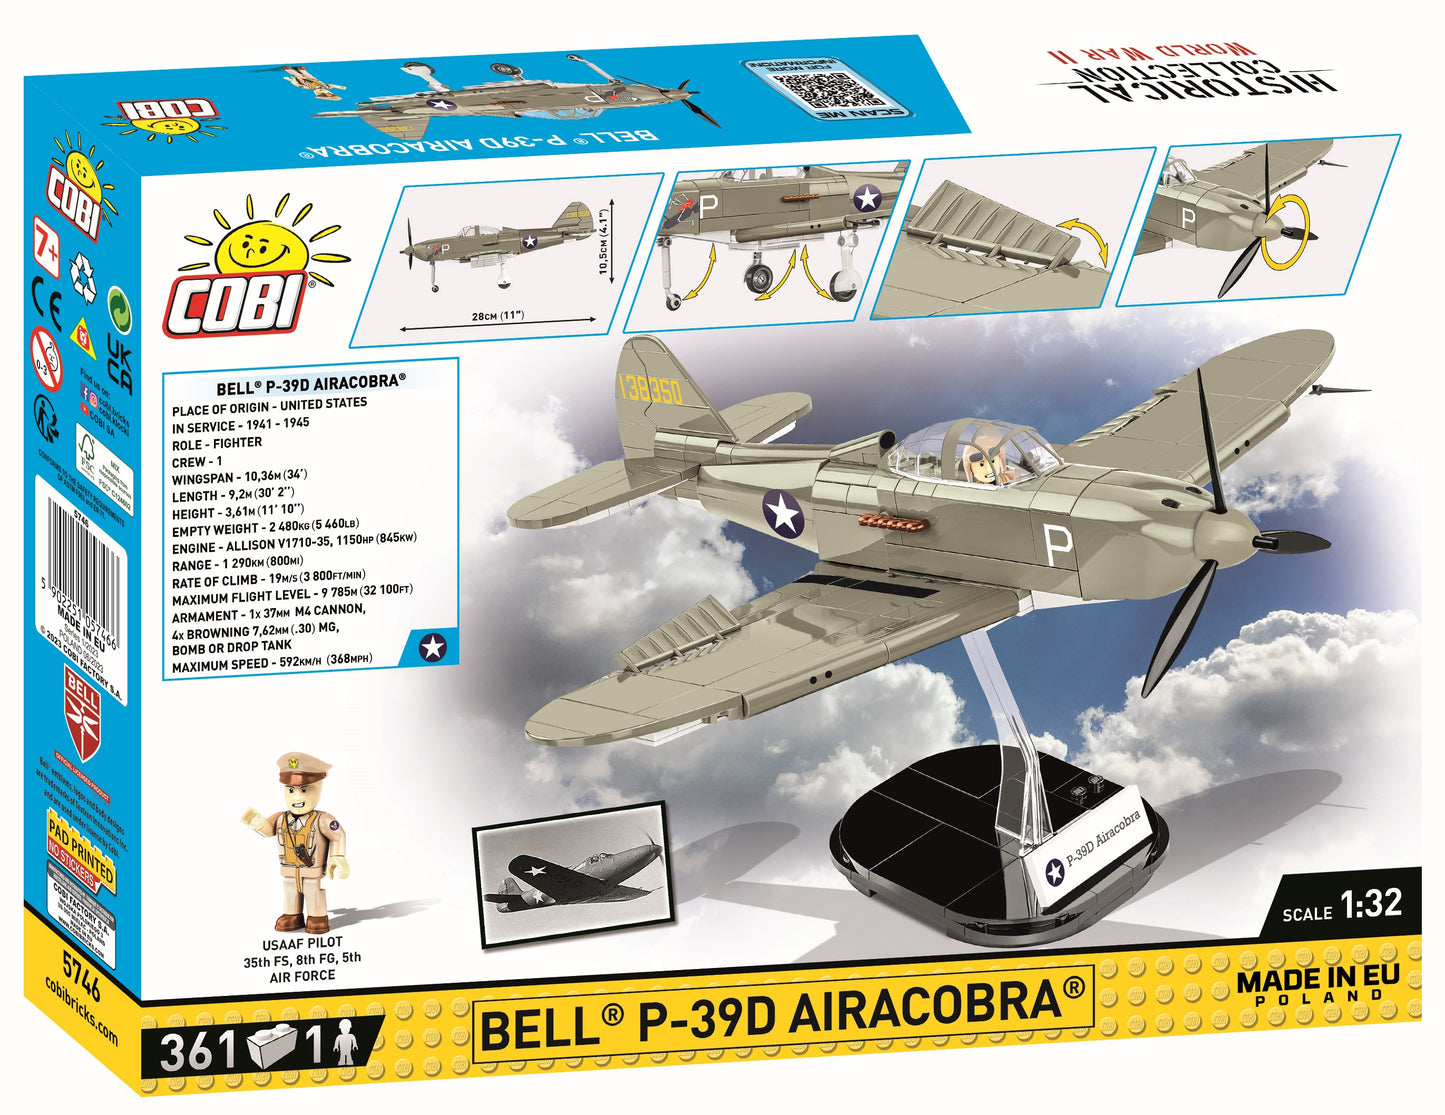 COBI Historical Collection WWII BELL® P-39D AIRACOBRA® Aircraft